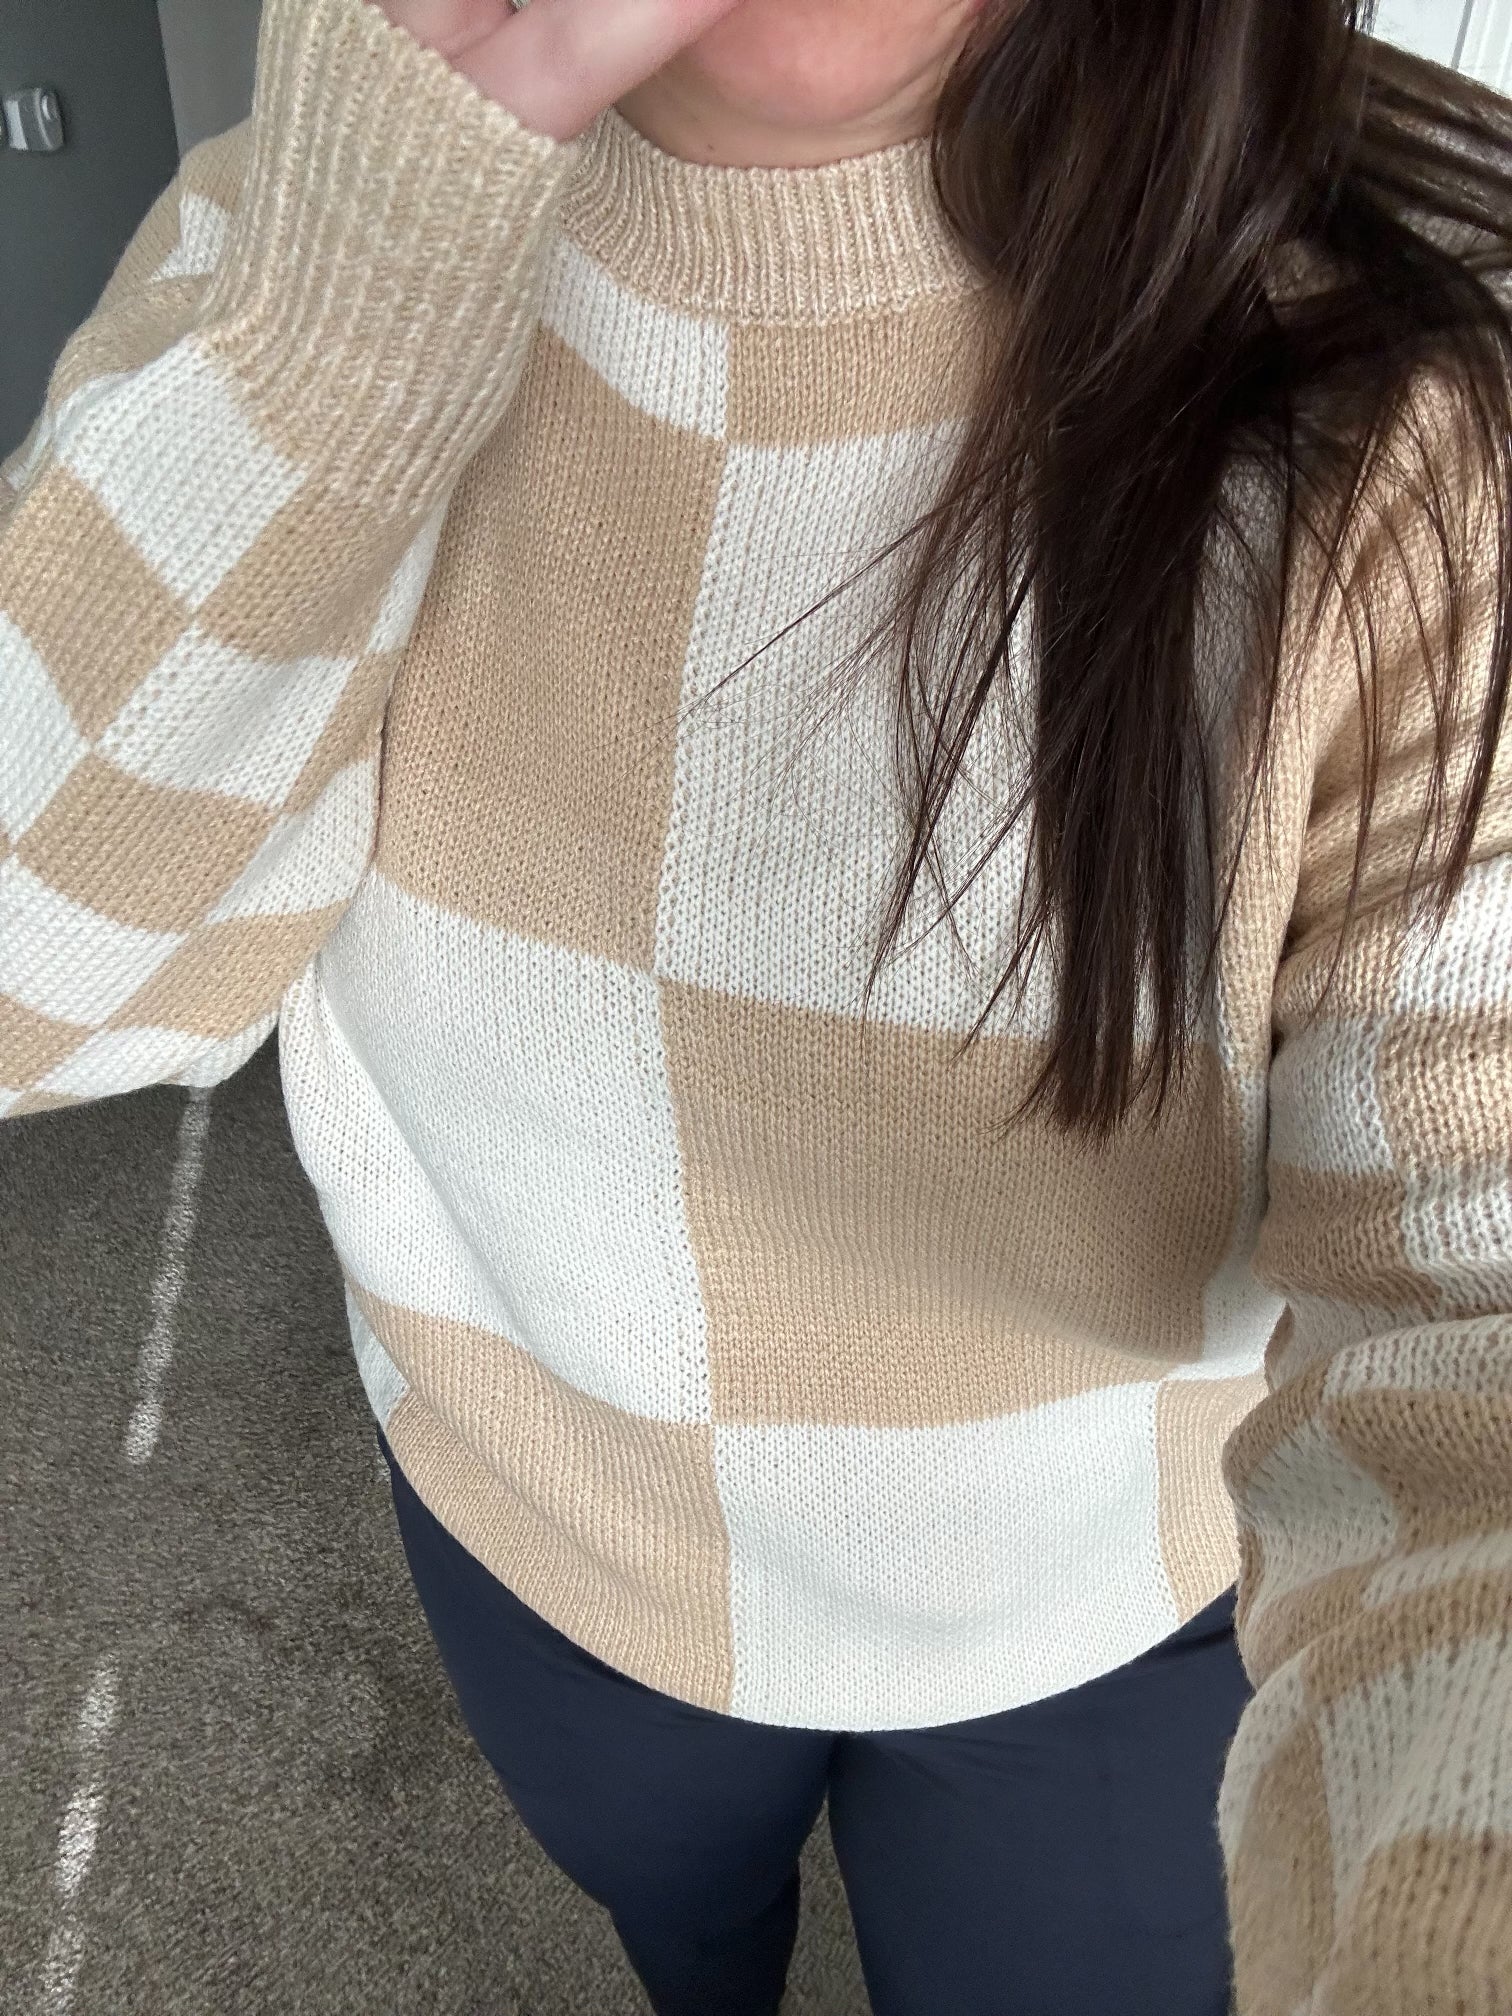 The Flaxen Checkered Sweater